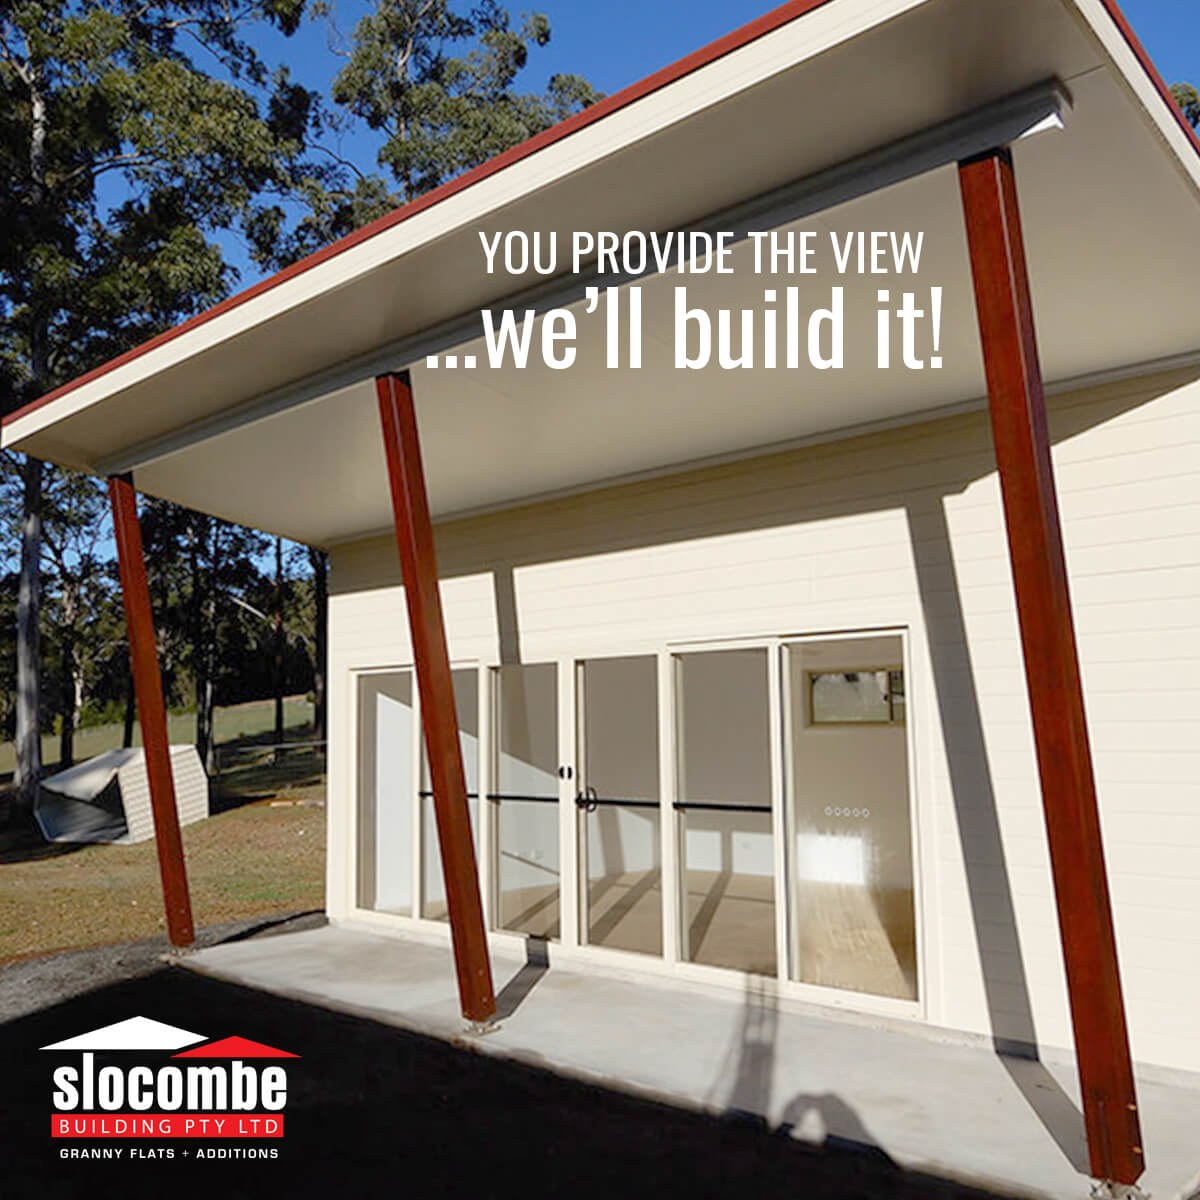 You provide the view...we'll build it. Call Slocombe Building Pty Ltd based in Port Macquarie.